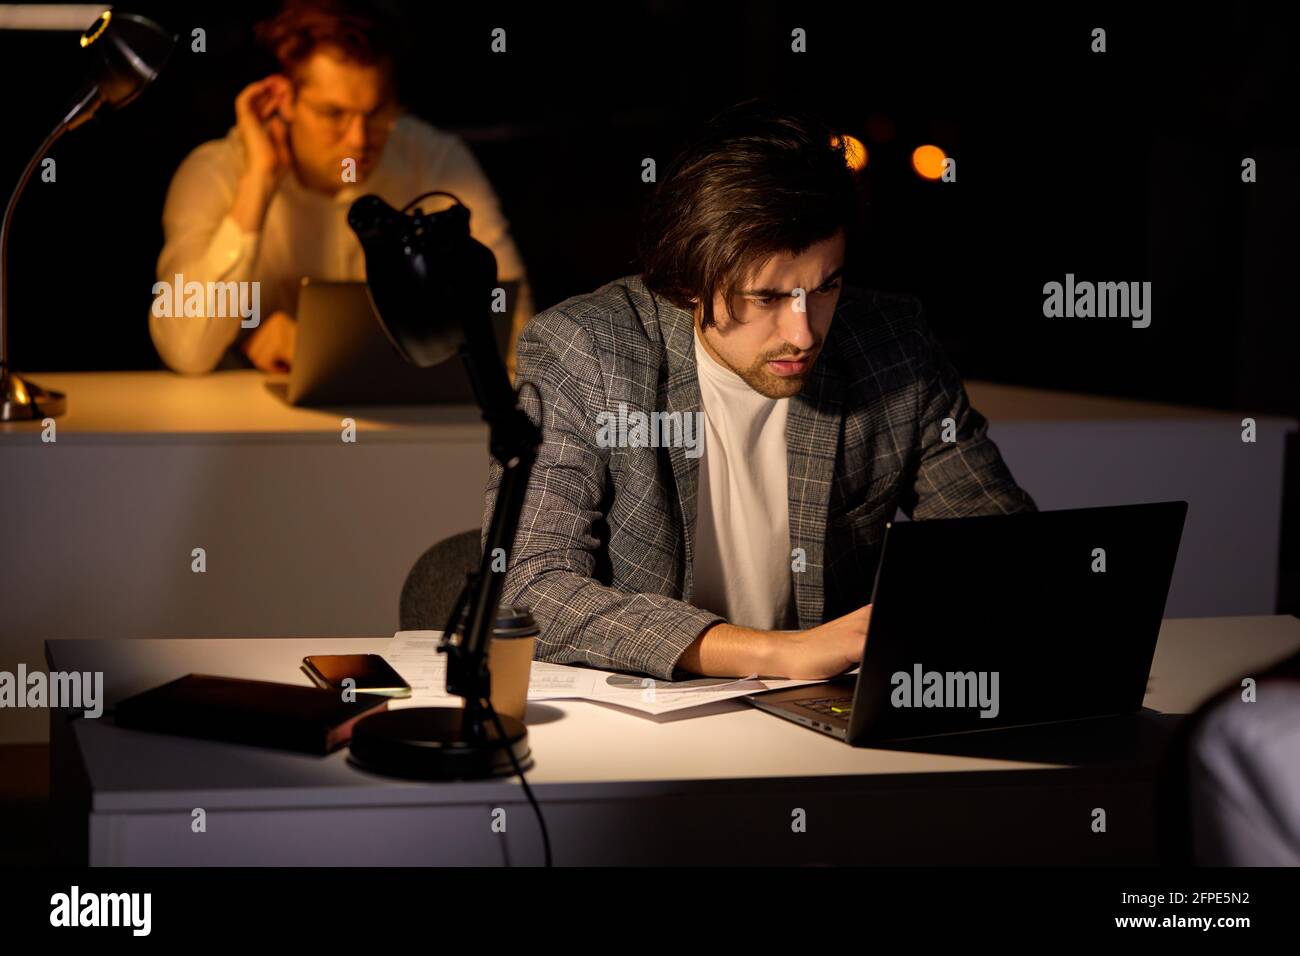 tired focused young man working remotely late at night in dark office using computer, typing, thinking about deadline, in formal wear. Overwork, negat Stock Photo